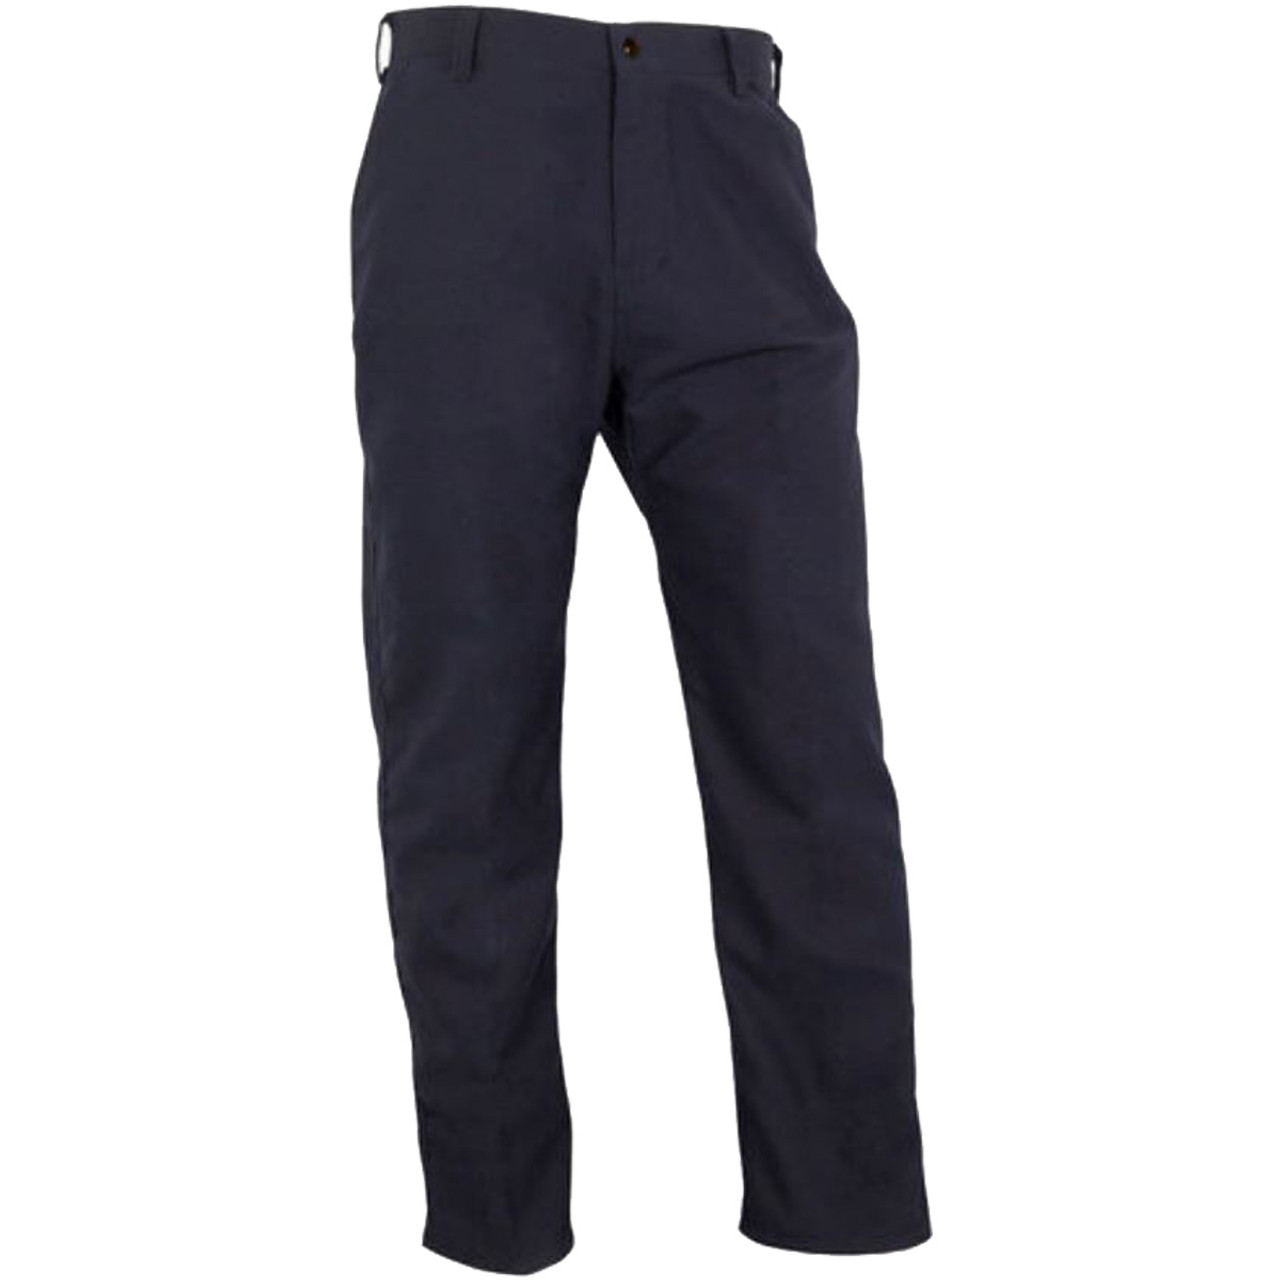 CrewBoss CAL FIRE Work Uniform Pant | Curtis - Tools for Heroes